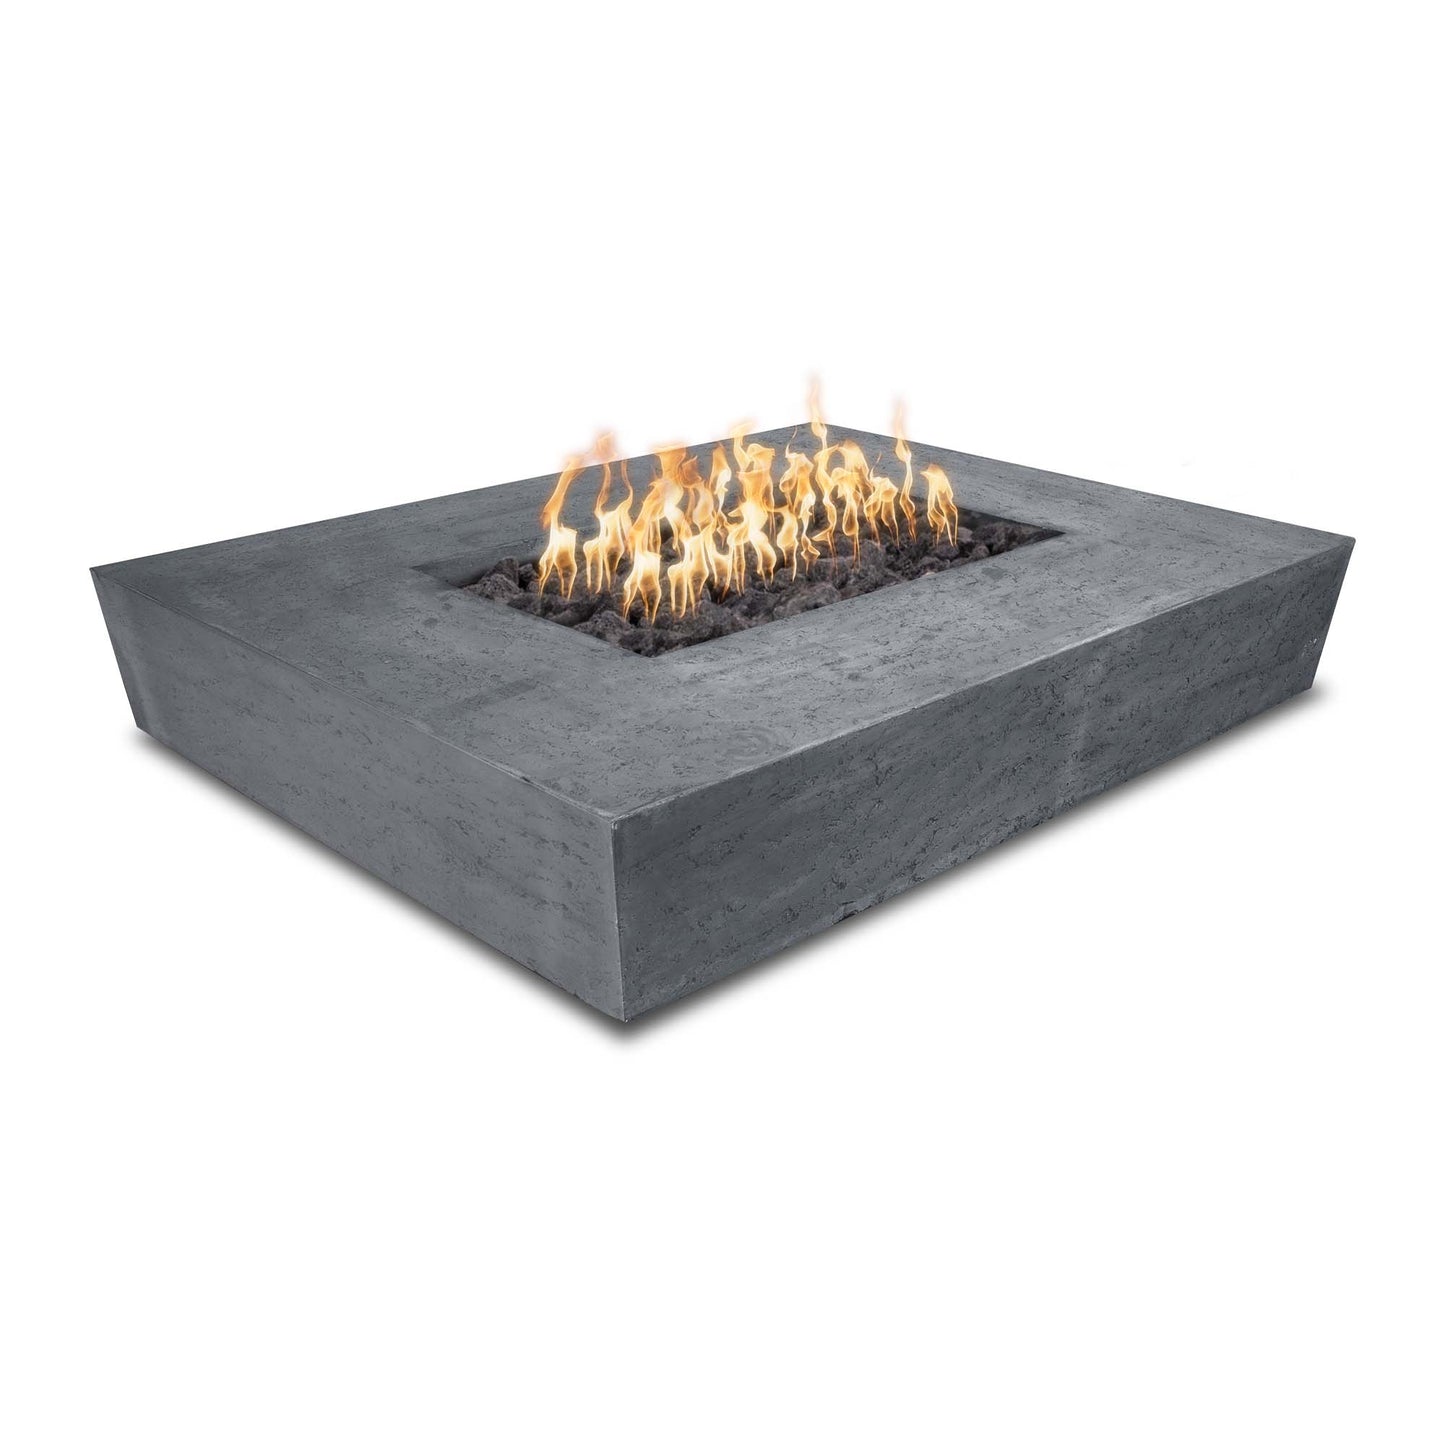 The Outdoor Plus Rectangular Heiko 58" Ash GFRC Concrete Natural Gas Fire Pit with Match Lit with Flame Sense Ignition